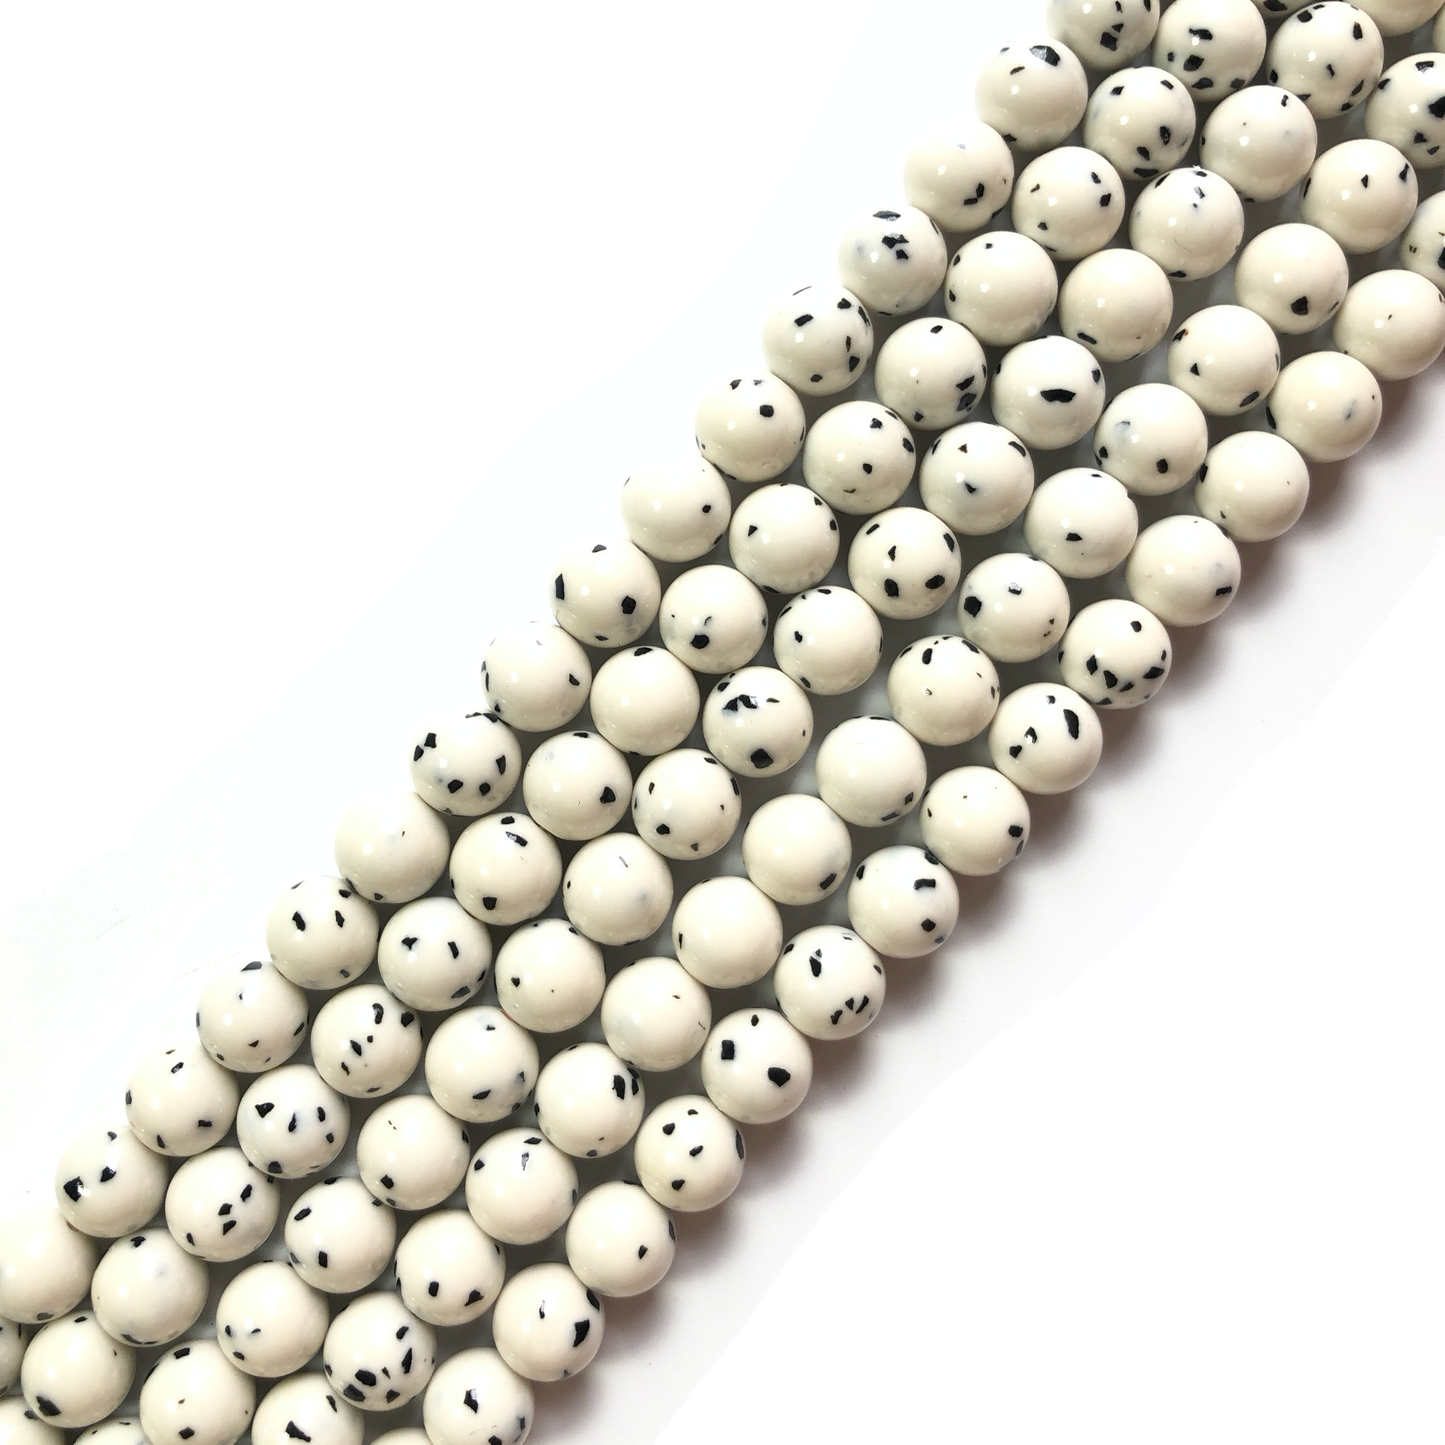 2 Strands/lot 8mm, 10mm Natural Black Point White Jade Round Stone Beads Stone Beads 8mm Stone Beads Round Jade Beads Charms Beads Beyond